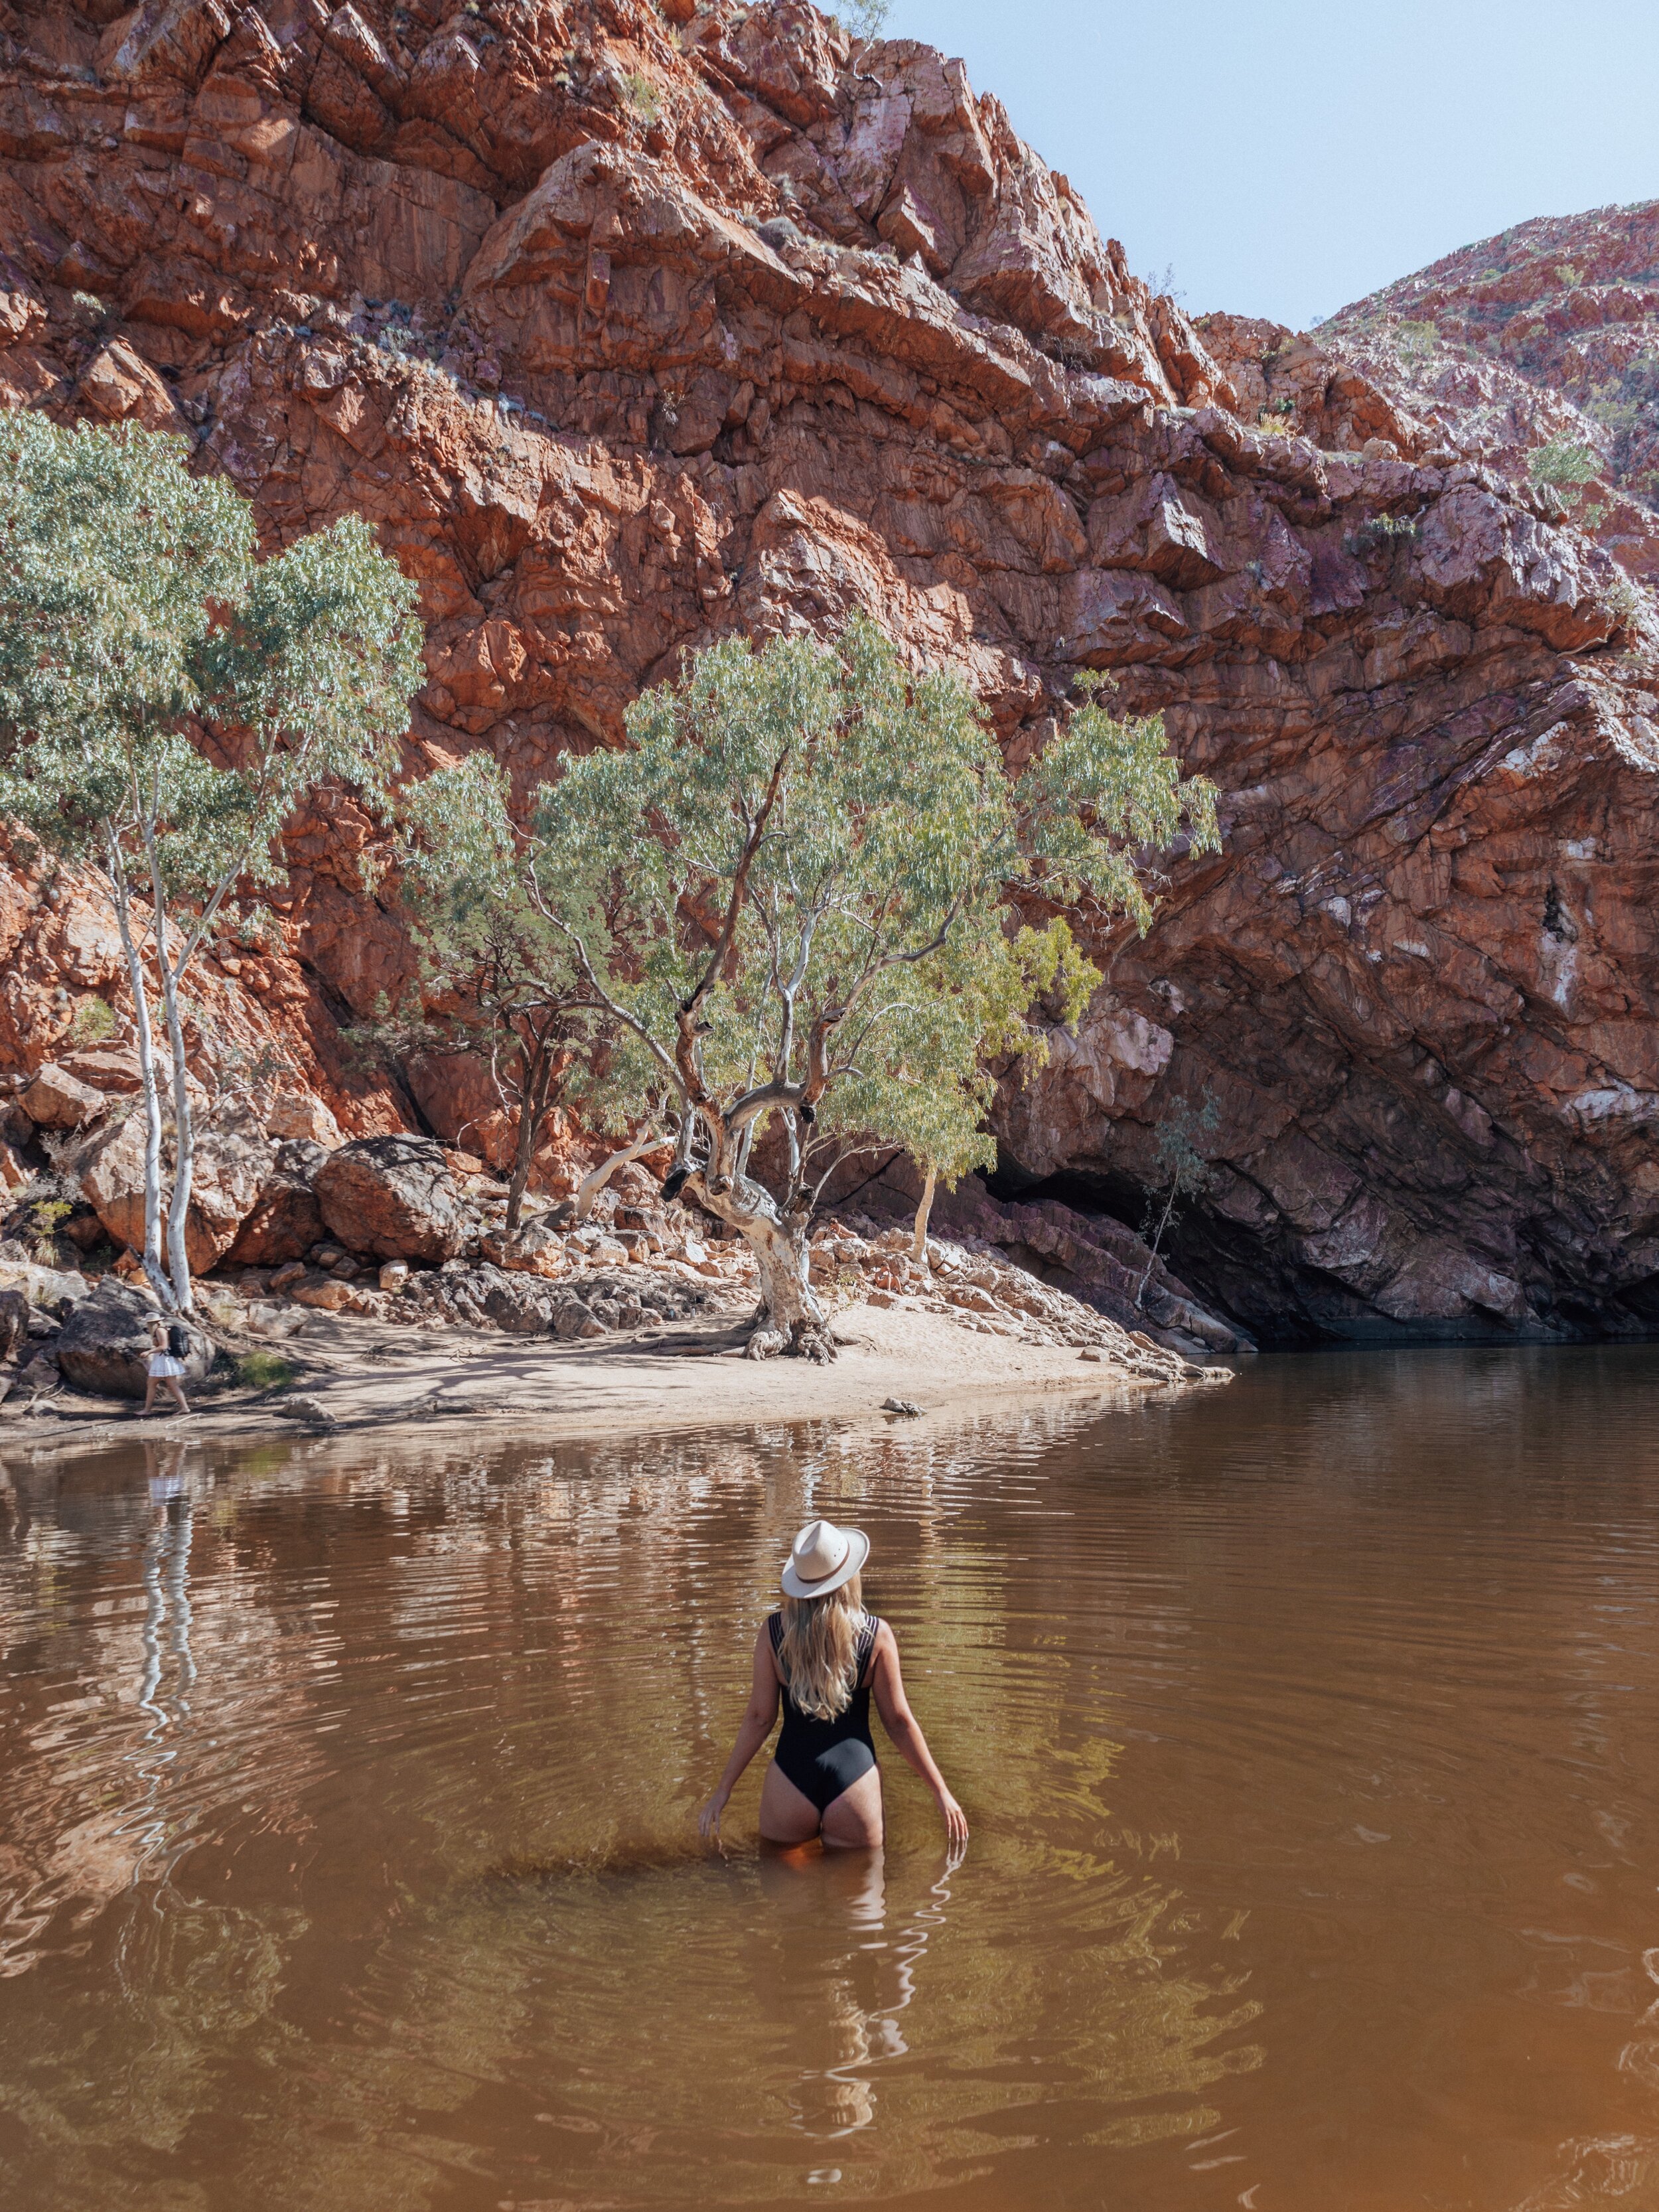 As far as I got into the water - Ormiston Gorge - West MacDonnell Ranges - Northern Territory - Australia